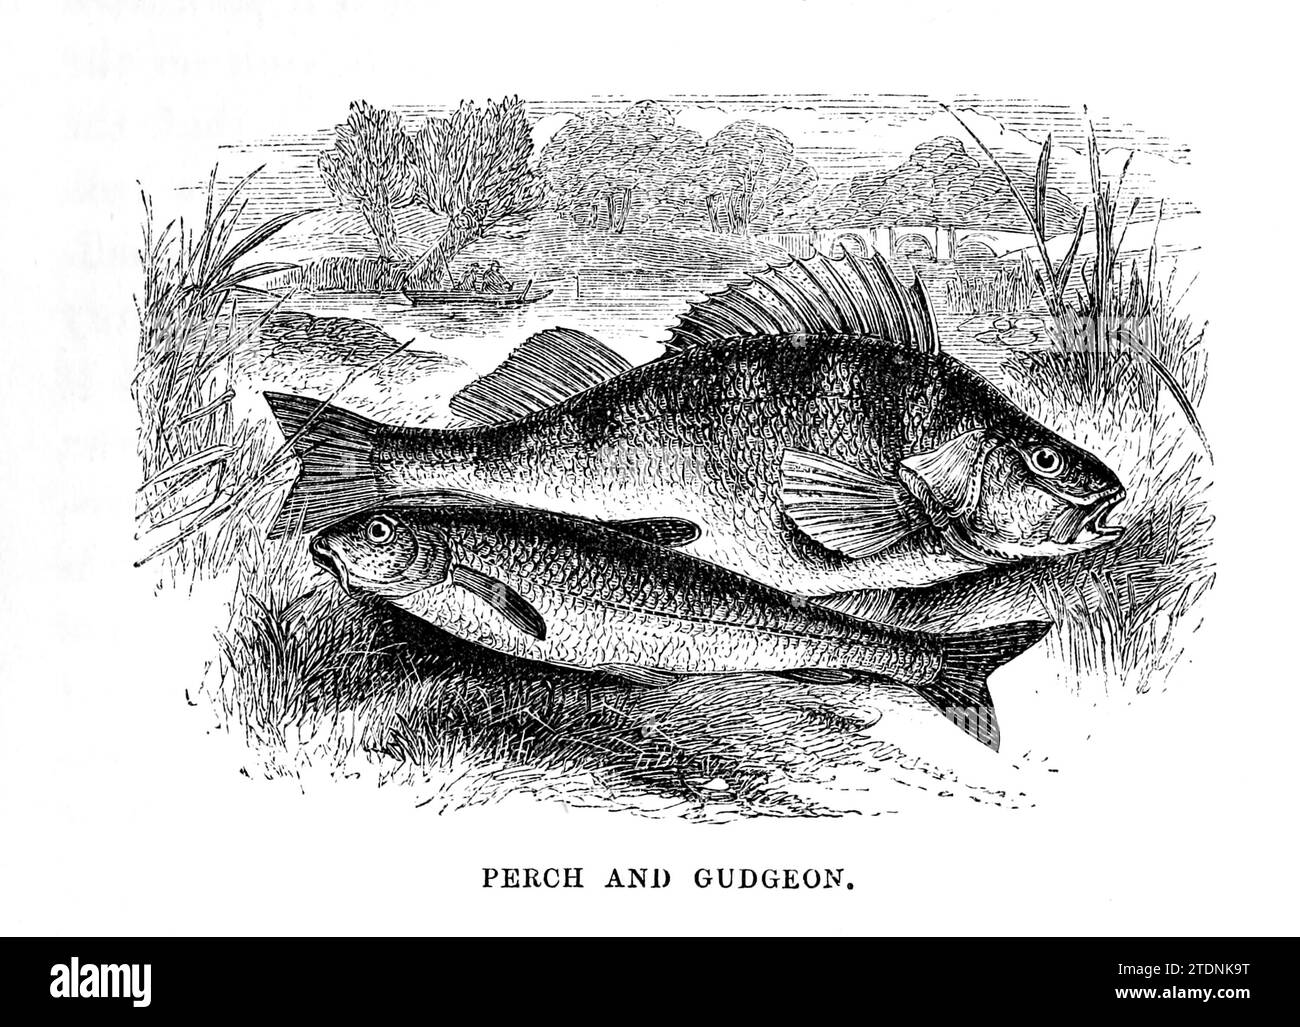 Perch and Gudgeon from the book The Severn valley: a series of sketches, descriptive and pictorial, of the course of the Severn: containing notices of its topographical, industrial, and geological features; with glances at its historical and legendary associations by Randall, John, 1810-1910 Publication date 1862 Publisher J. S. Virtue Stock Photo